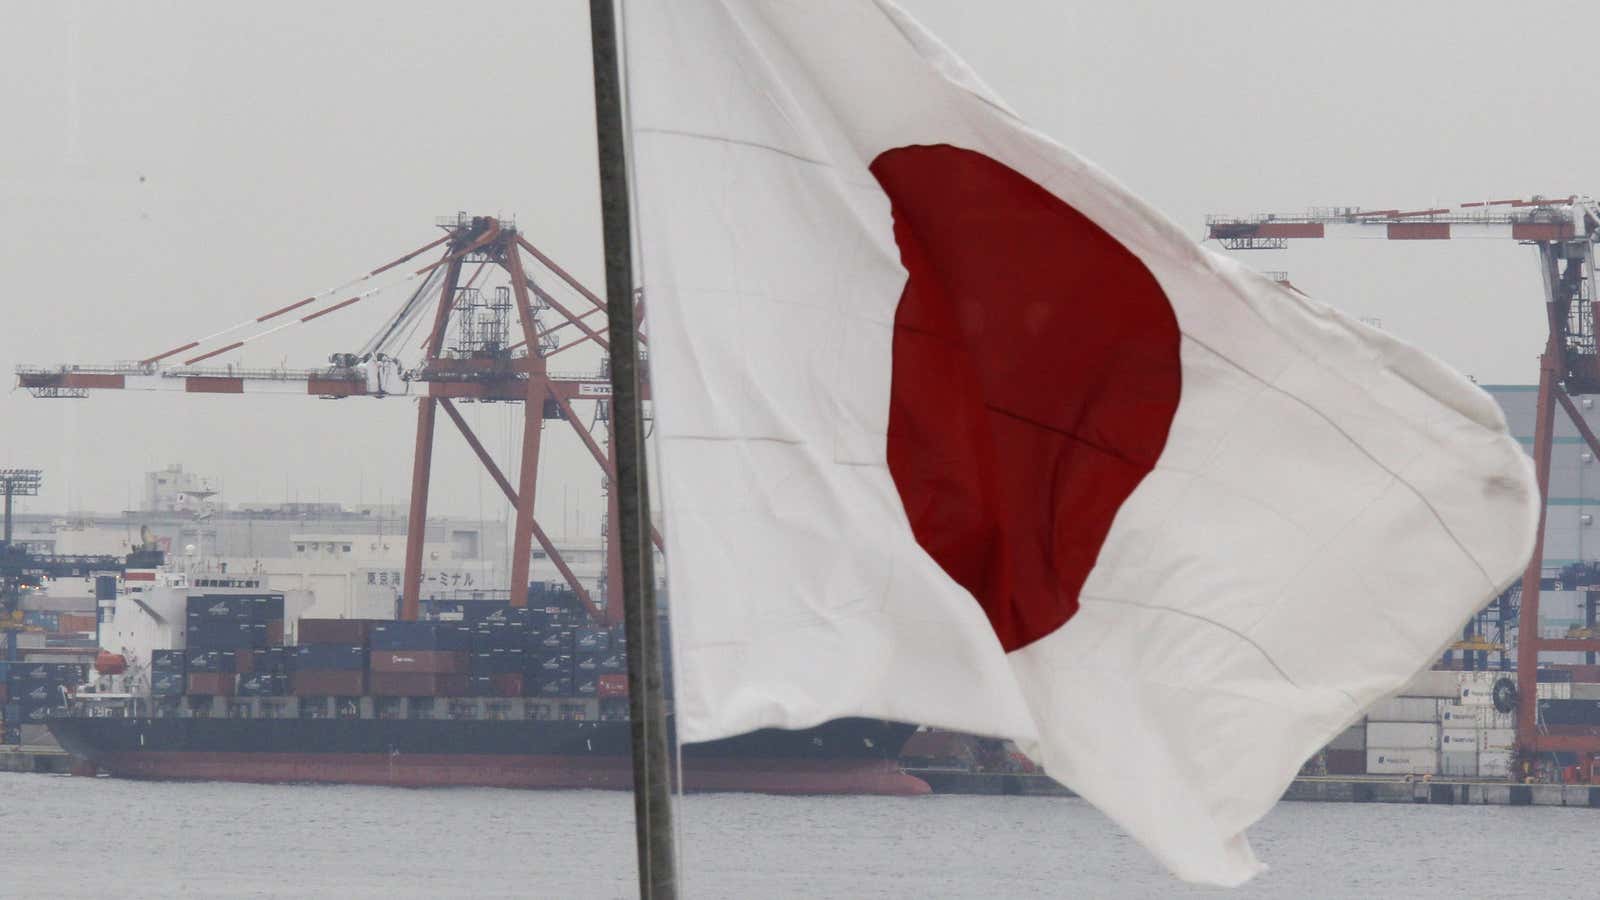 A cargo ship is seen behind Japan’s national flag at an industrial port in Tokyo.